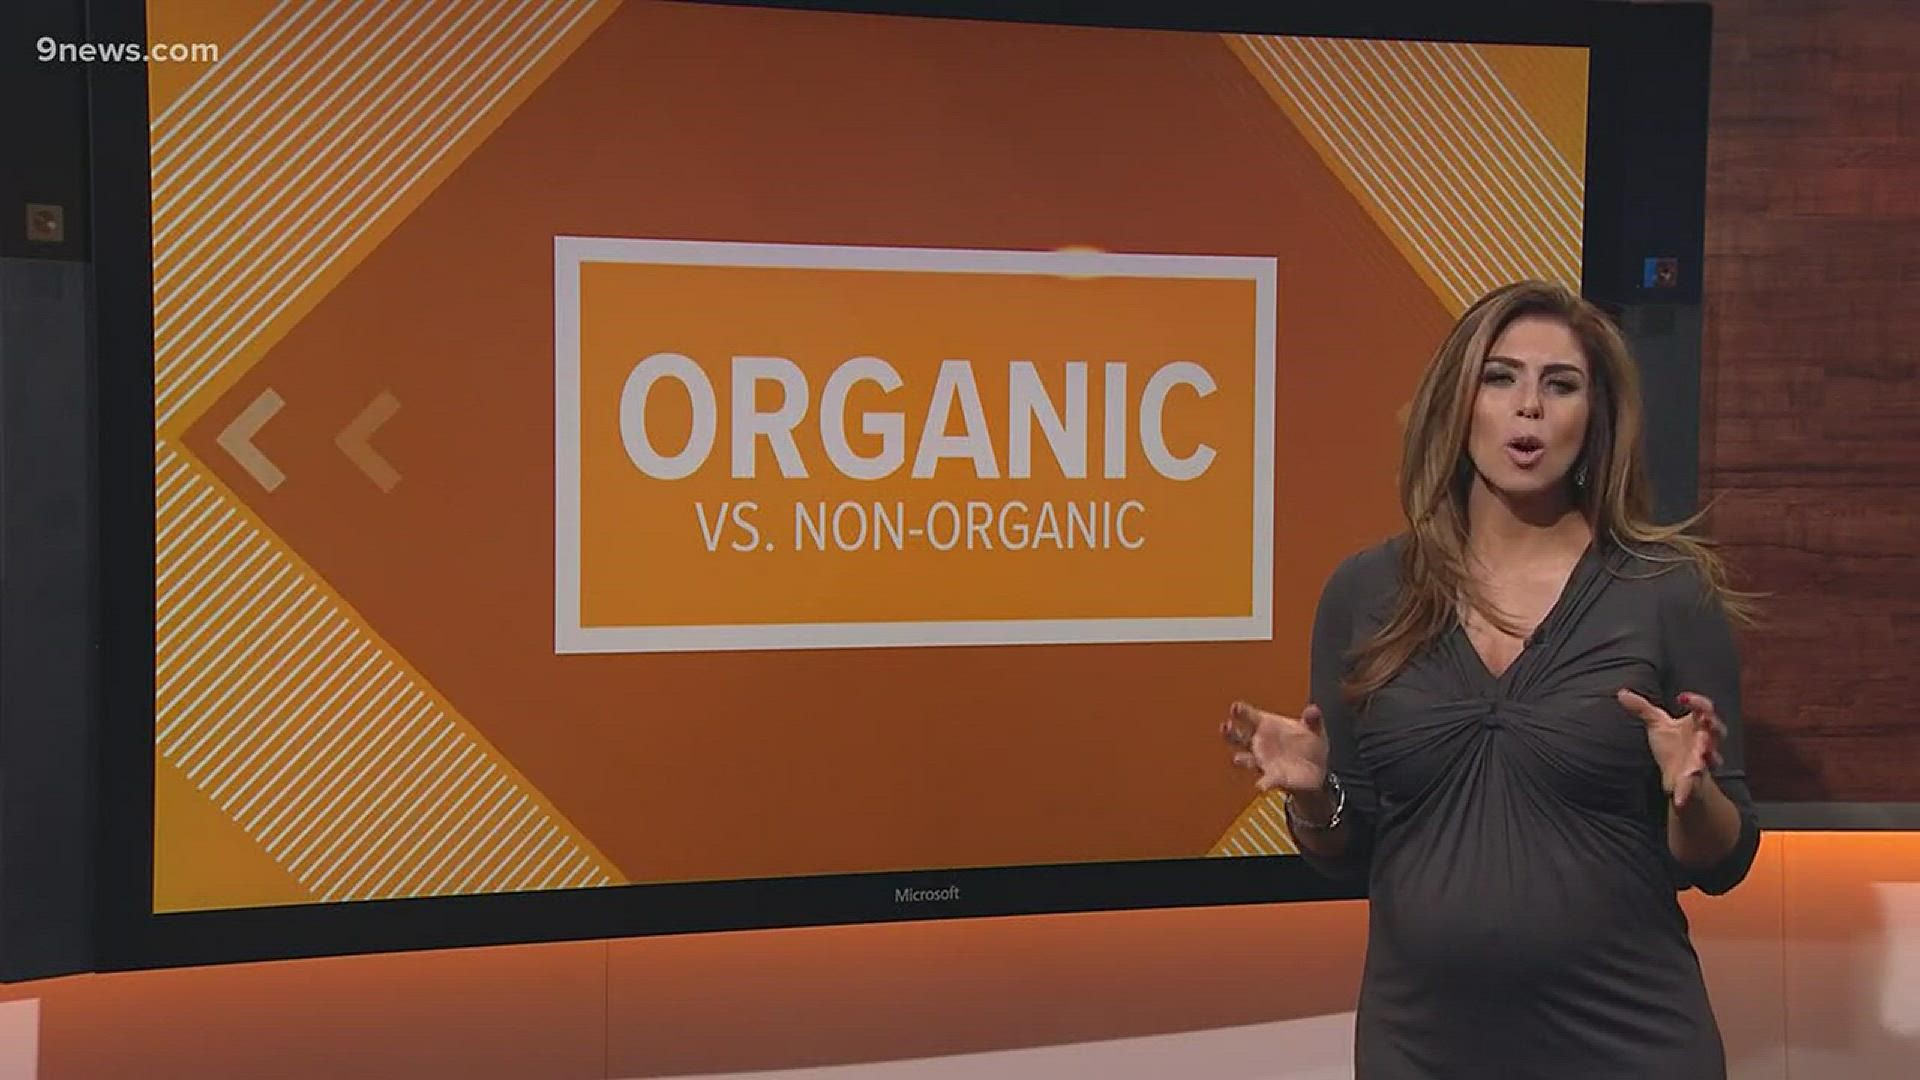 When it comes to organic you may want to pick and choose what you buy. Some items, like potatoes, are more likely to absorb pesticides while something like an avocado, which has a thicker covering is less likely. Our 9NEWS nutrition expert has more.